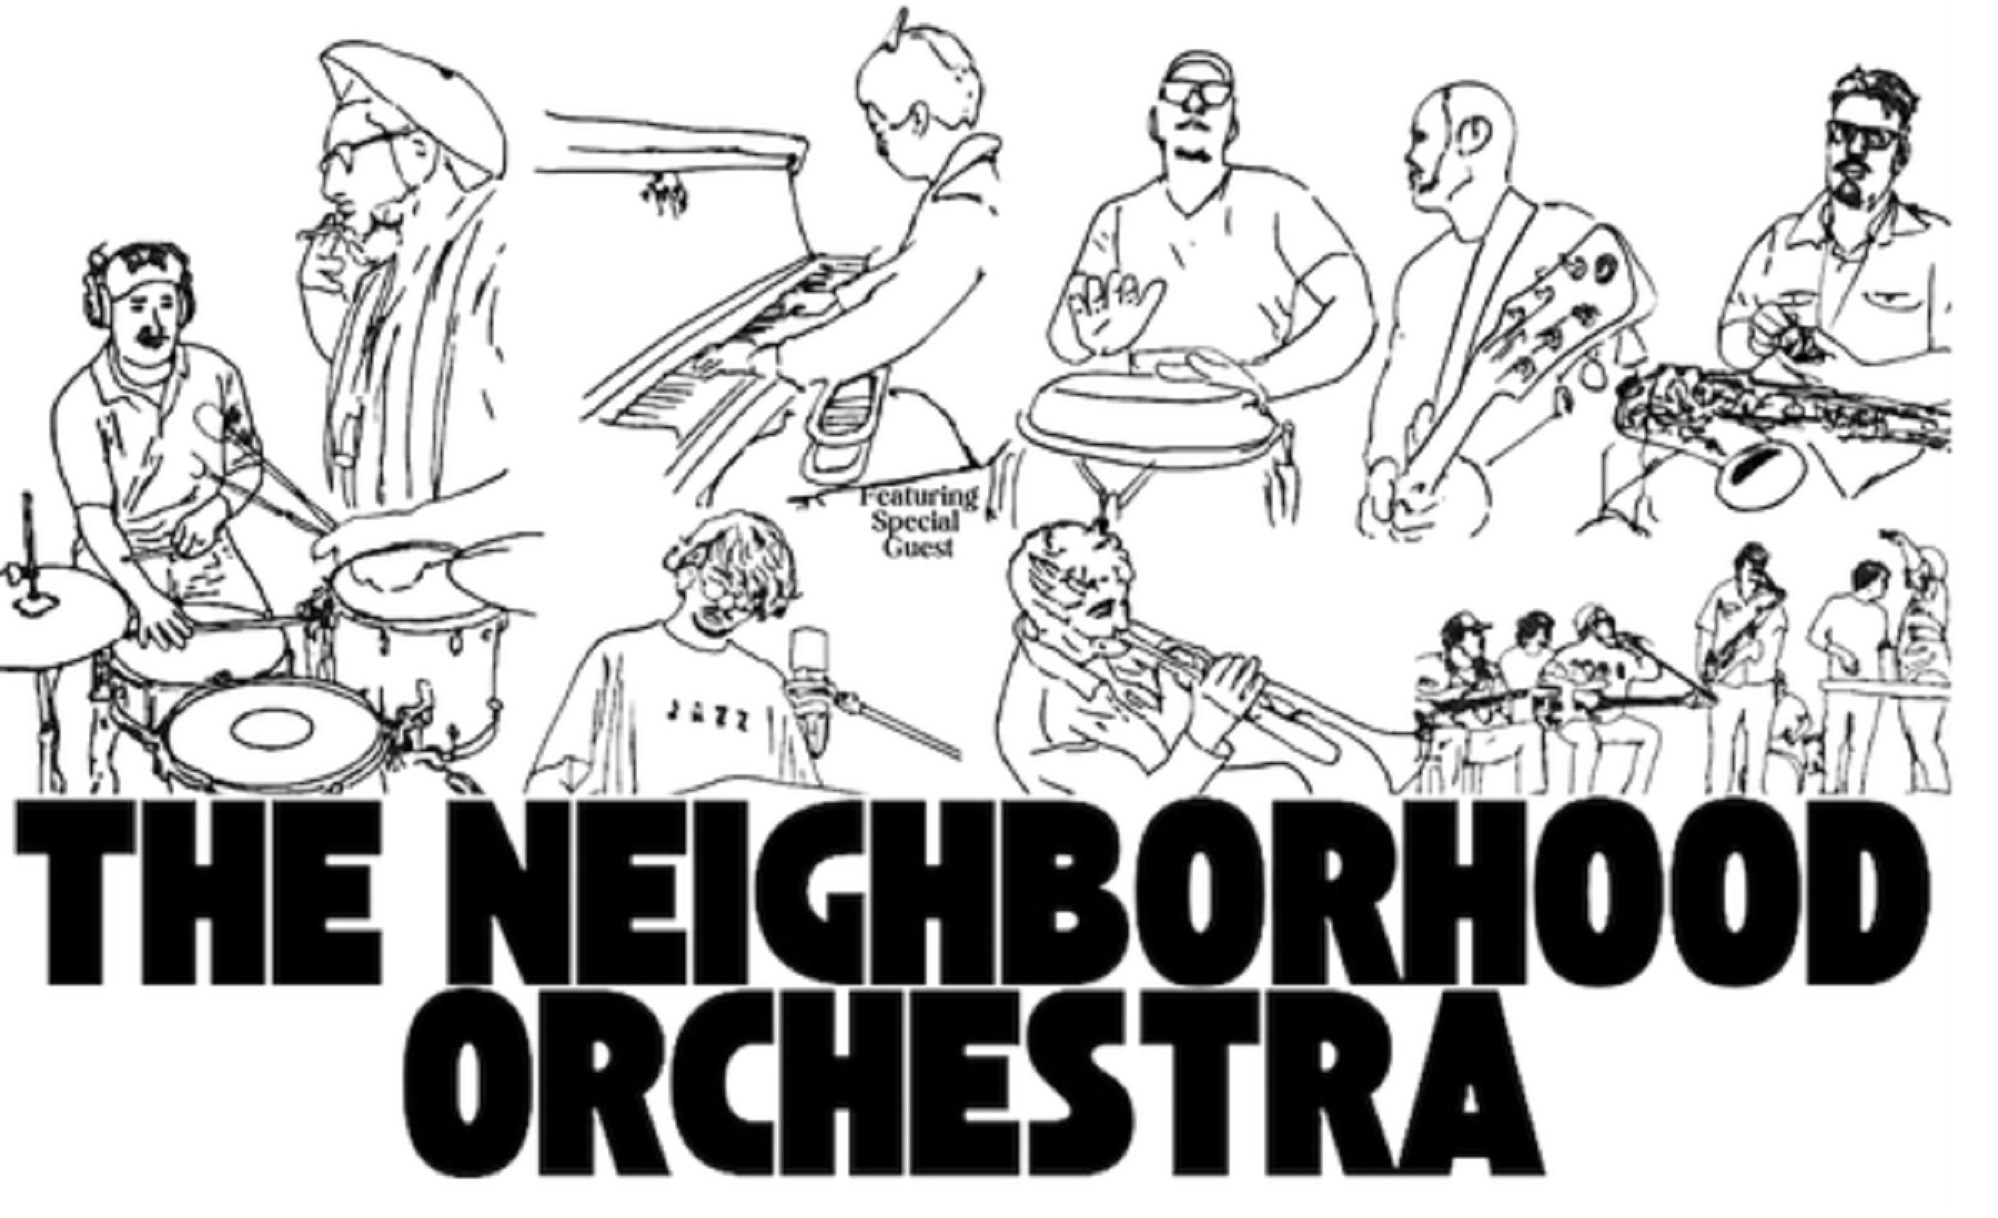 LA-BASED GLOBAL JAZZ ENSEMBLE THE NEIGHBORHOOD ORCHESTRA TO RELEASE SECOND SINGLE “IN A LITTLE MOOD:” AN ODE TO THANKFULNESS AND COMMUNITY BUILDING